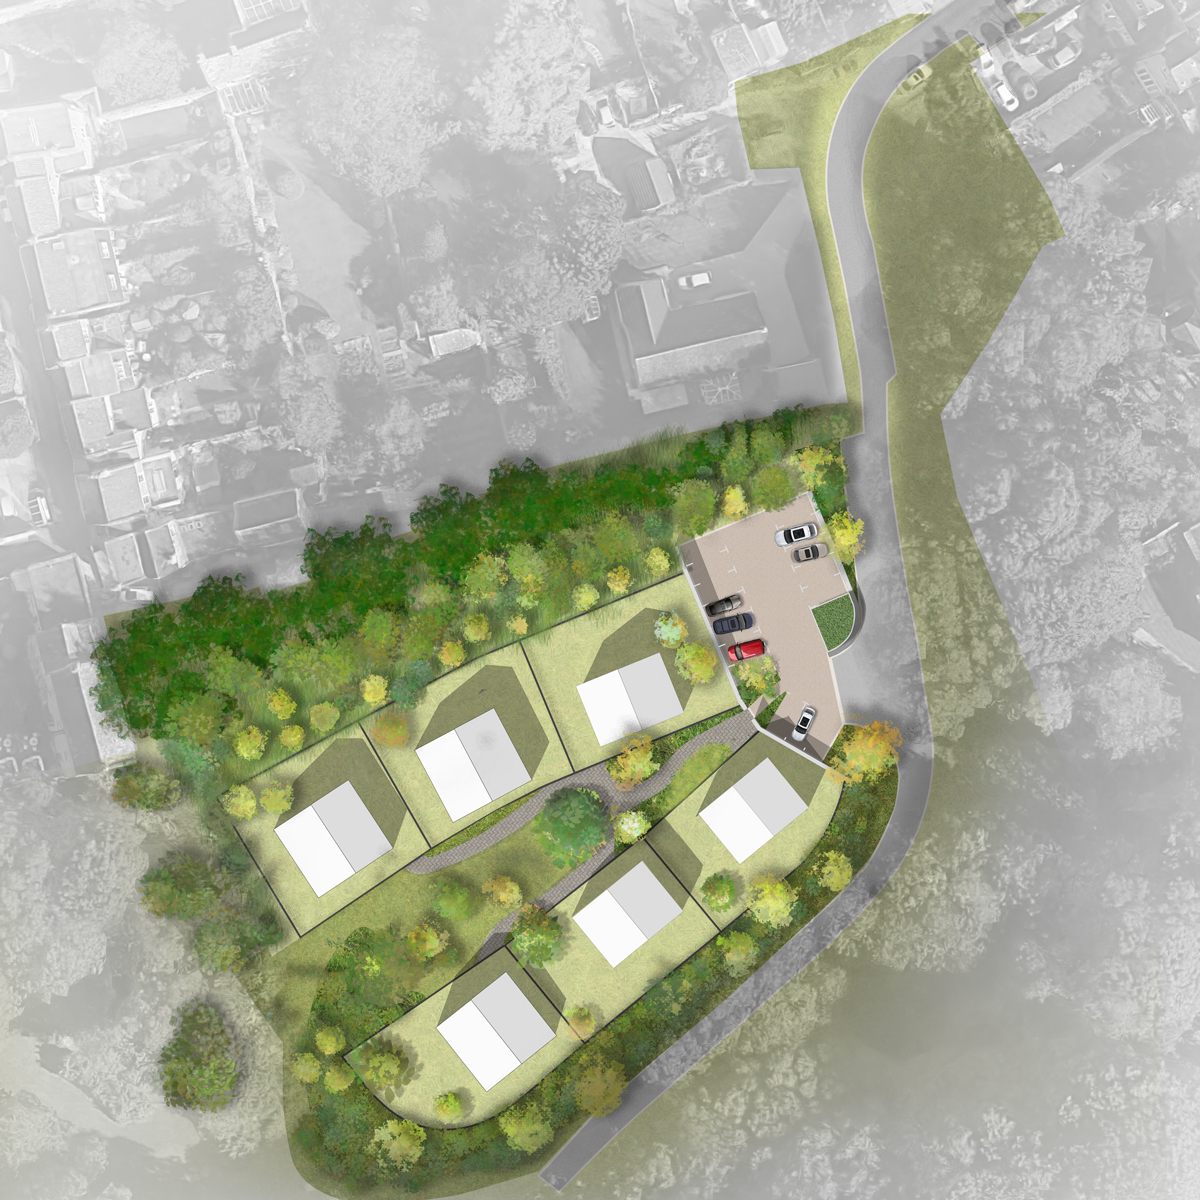 Plan of the Passive House development at Cox's Quarry